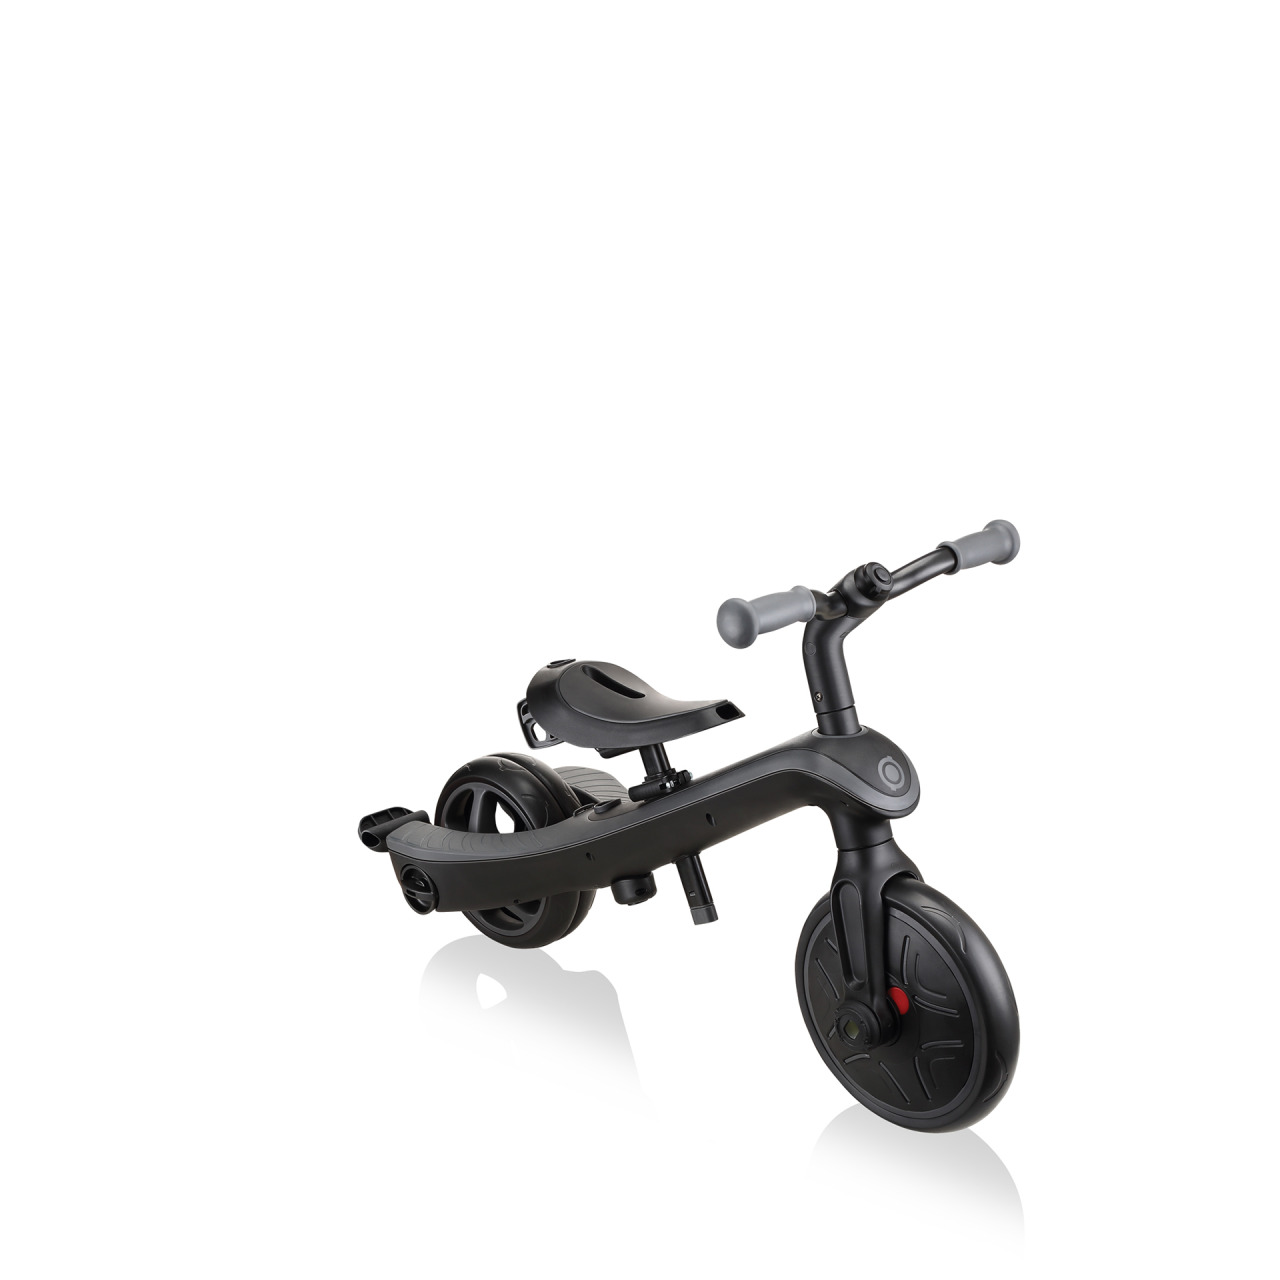 630 120 4 In 1 Tricycle Balance Bike